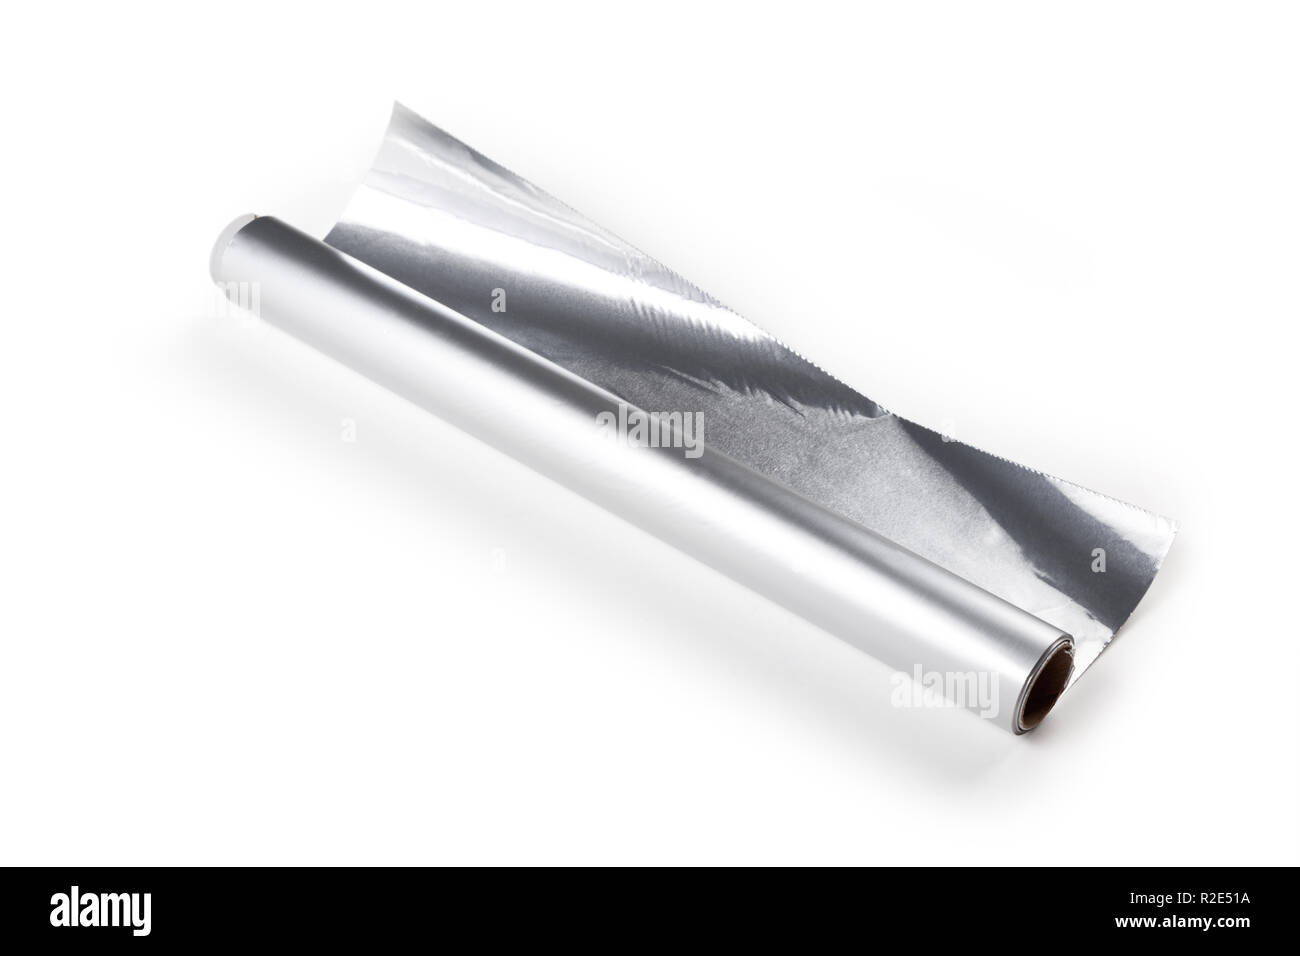 Aluminum foil roll on the white background, close up. Stock Photo